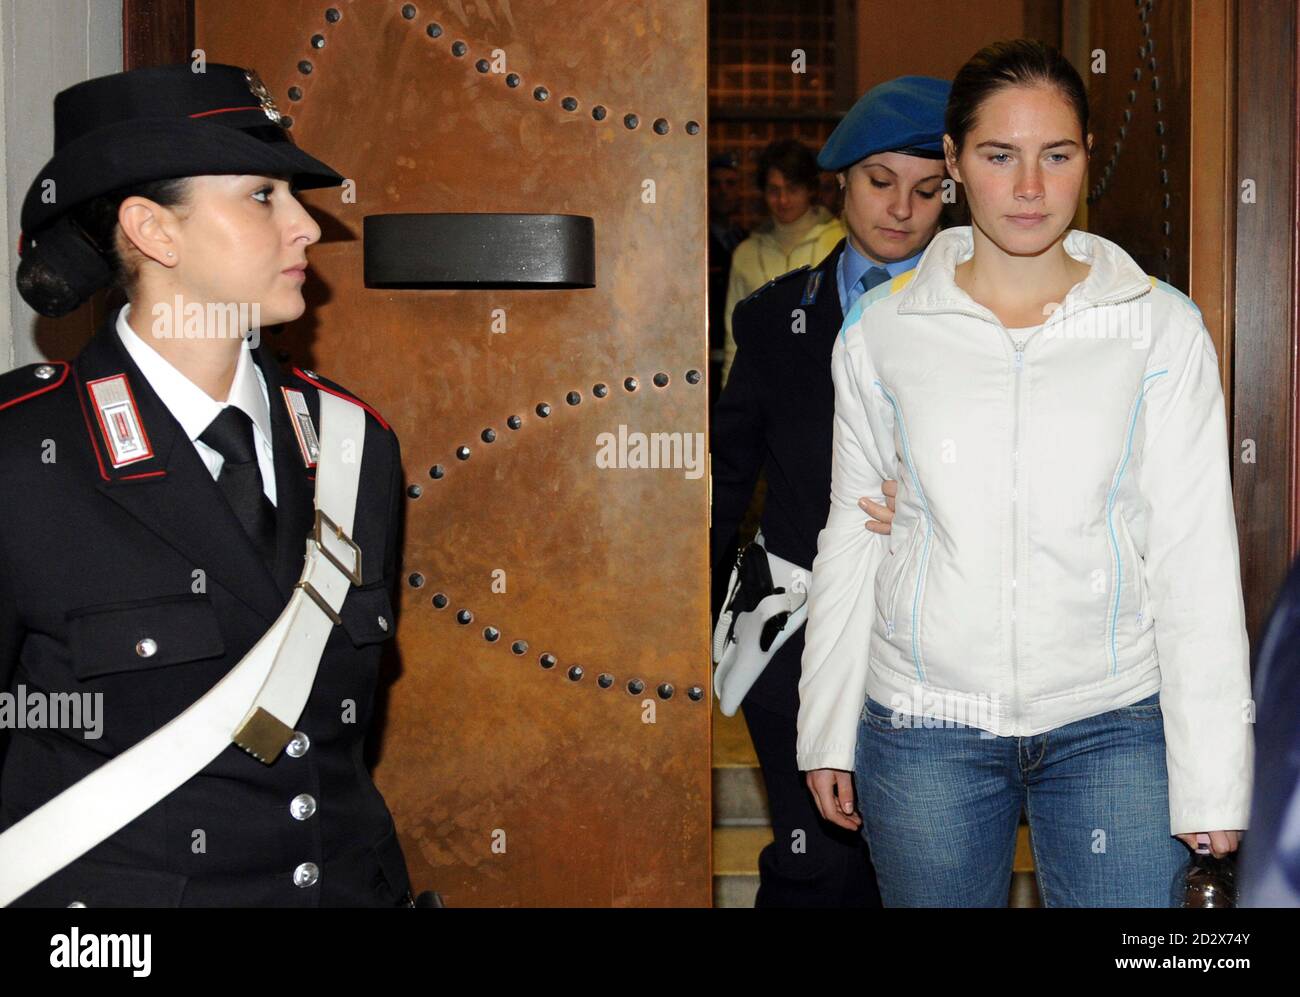 American university student Amanda Knox (R) is escorted into the courtroom during a murder trial session in Perugia November 28, 2009. Defendants Knox and her Italian ex-boyfriend Raffaele Sollecito are on trial for the murder of British student Meredith Kercher in November 2007. REUTERS/Alessandro Bianchi   (ITALY CRIME LAW) Stock Photo